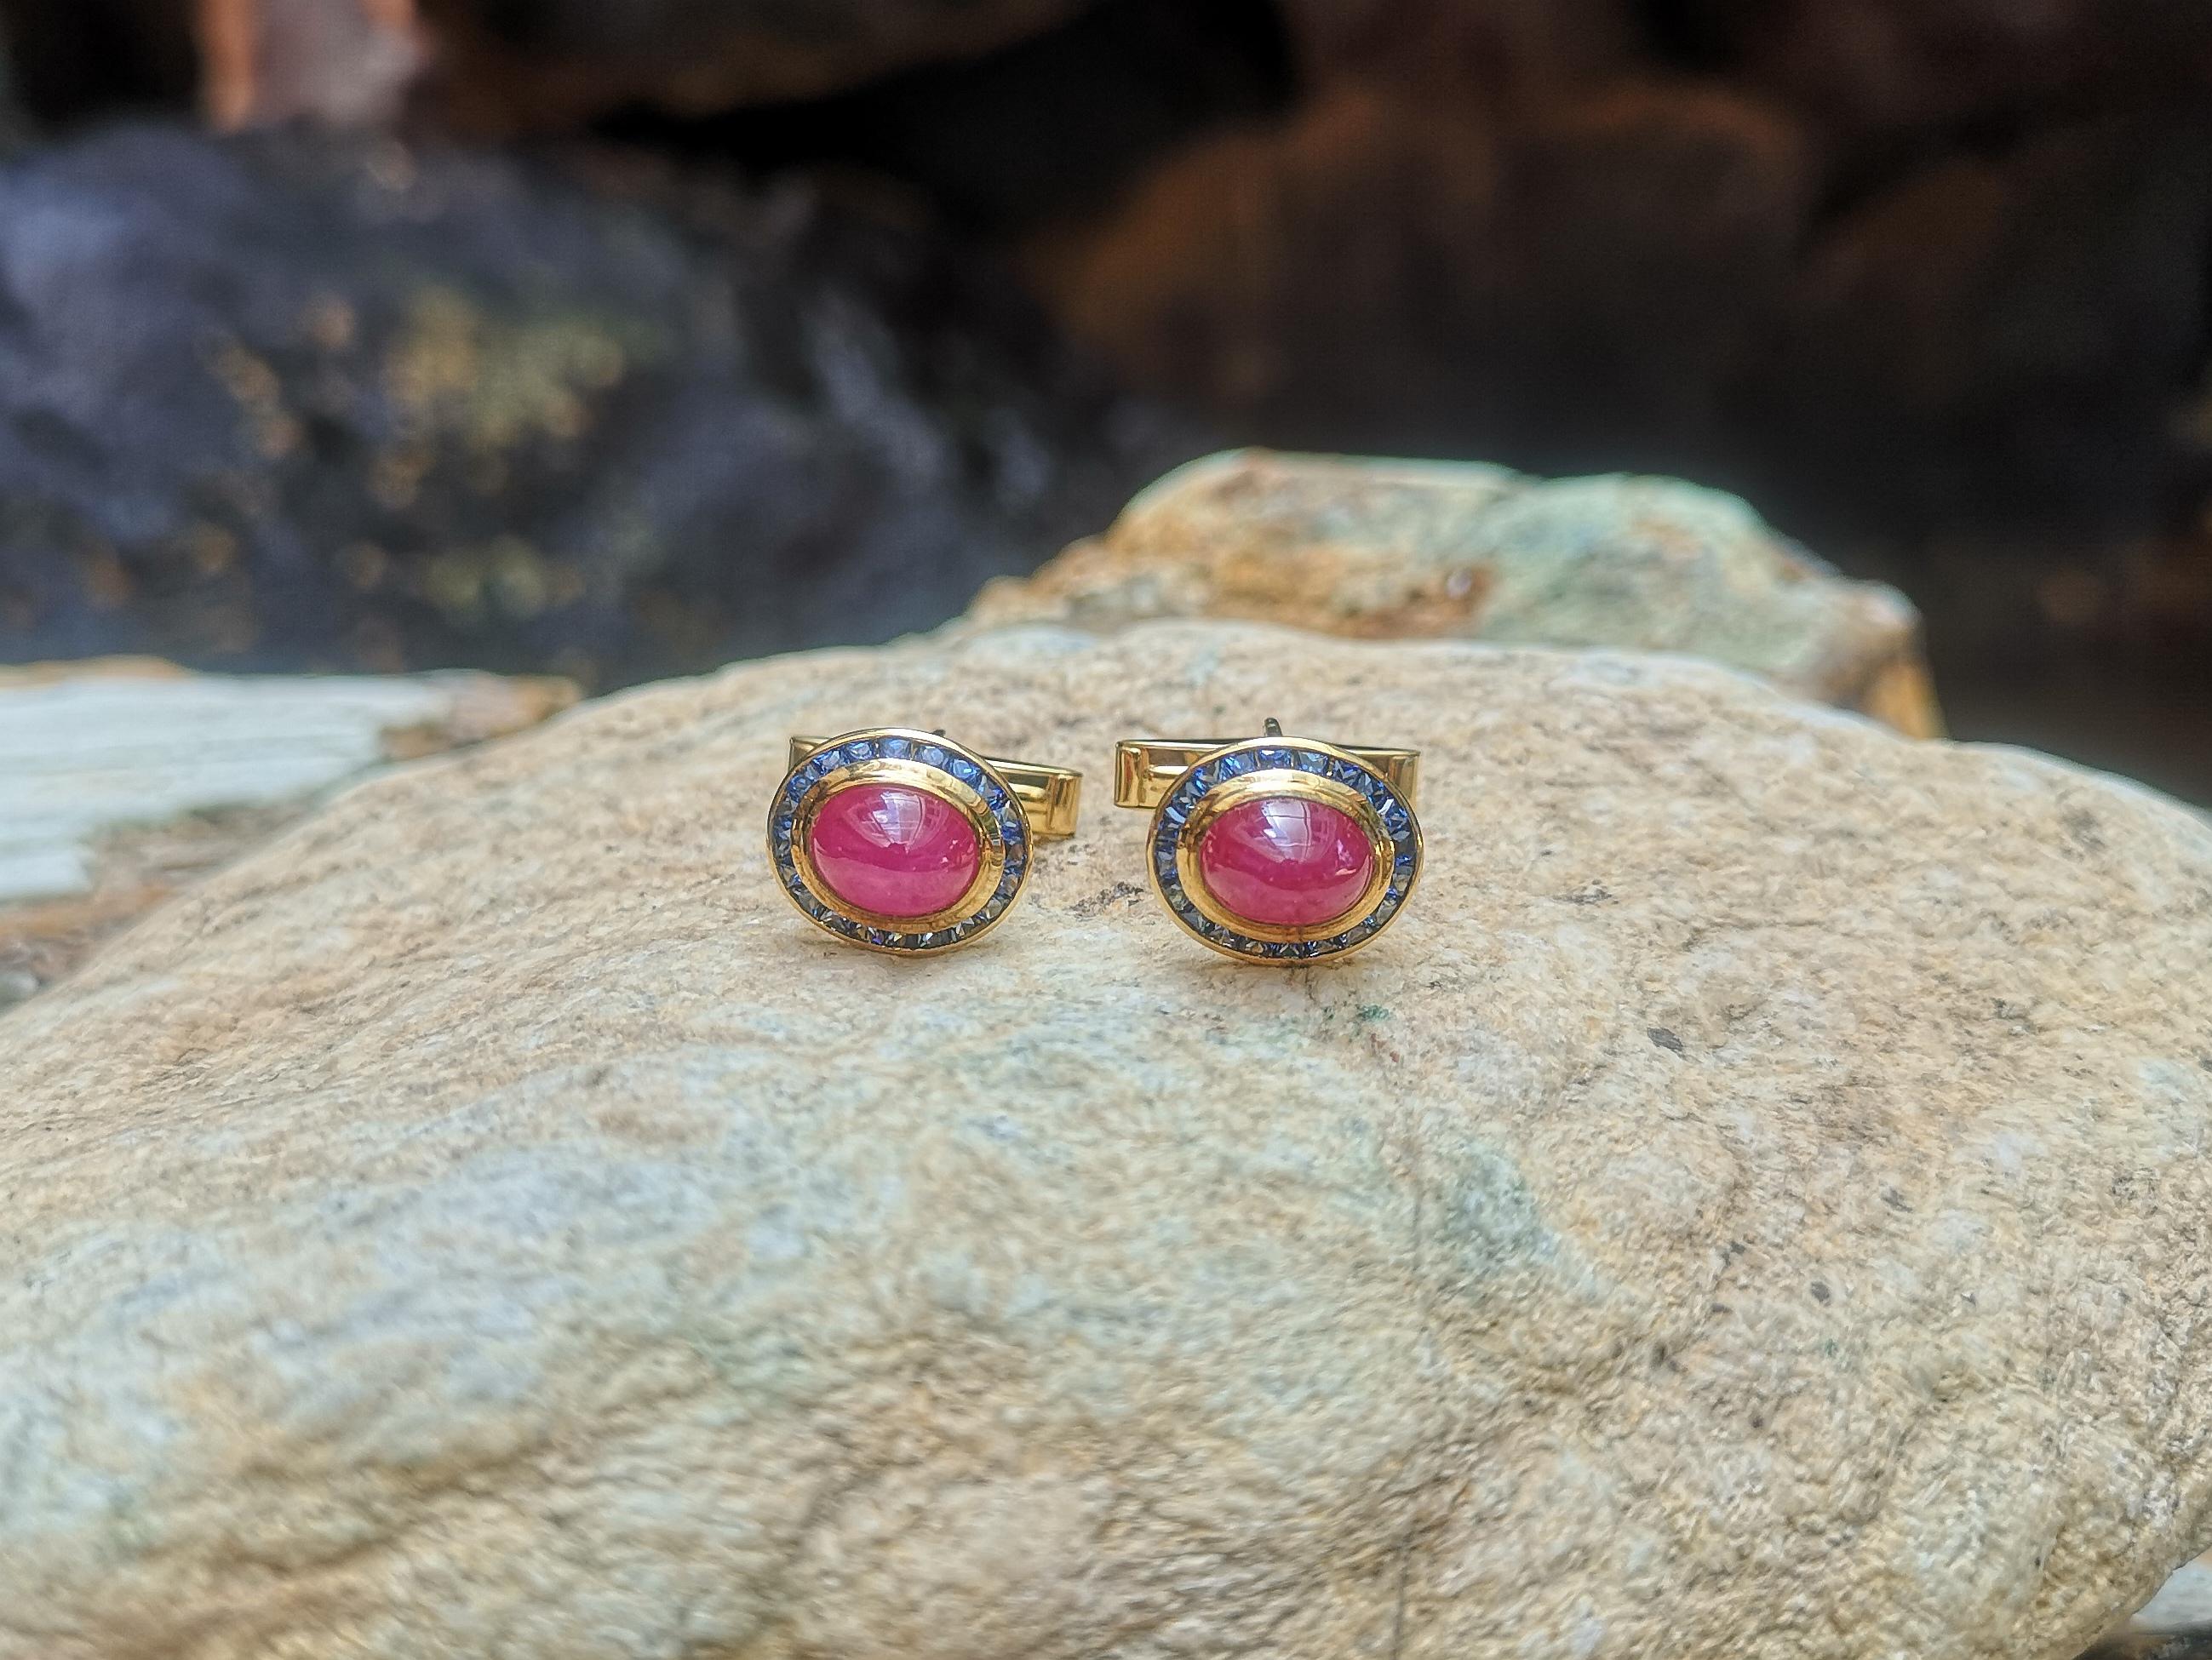 Cabochon Ruby 6.67 carats with Blue Sapphire 1.84 carats Cufflinks set in 18 Karat Gold Settings

Width:  1.5 cm 
Length: 1.0 cm
Total Weight: 8.08 grams

